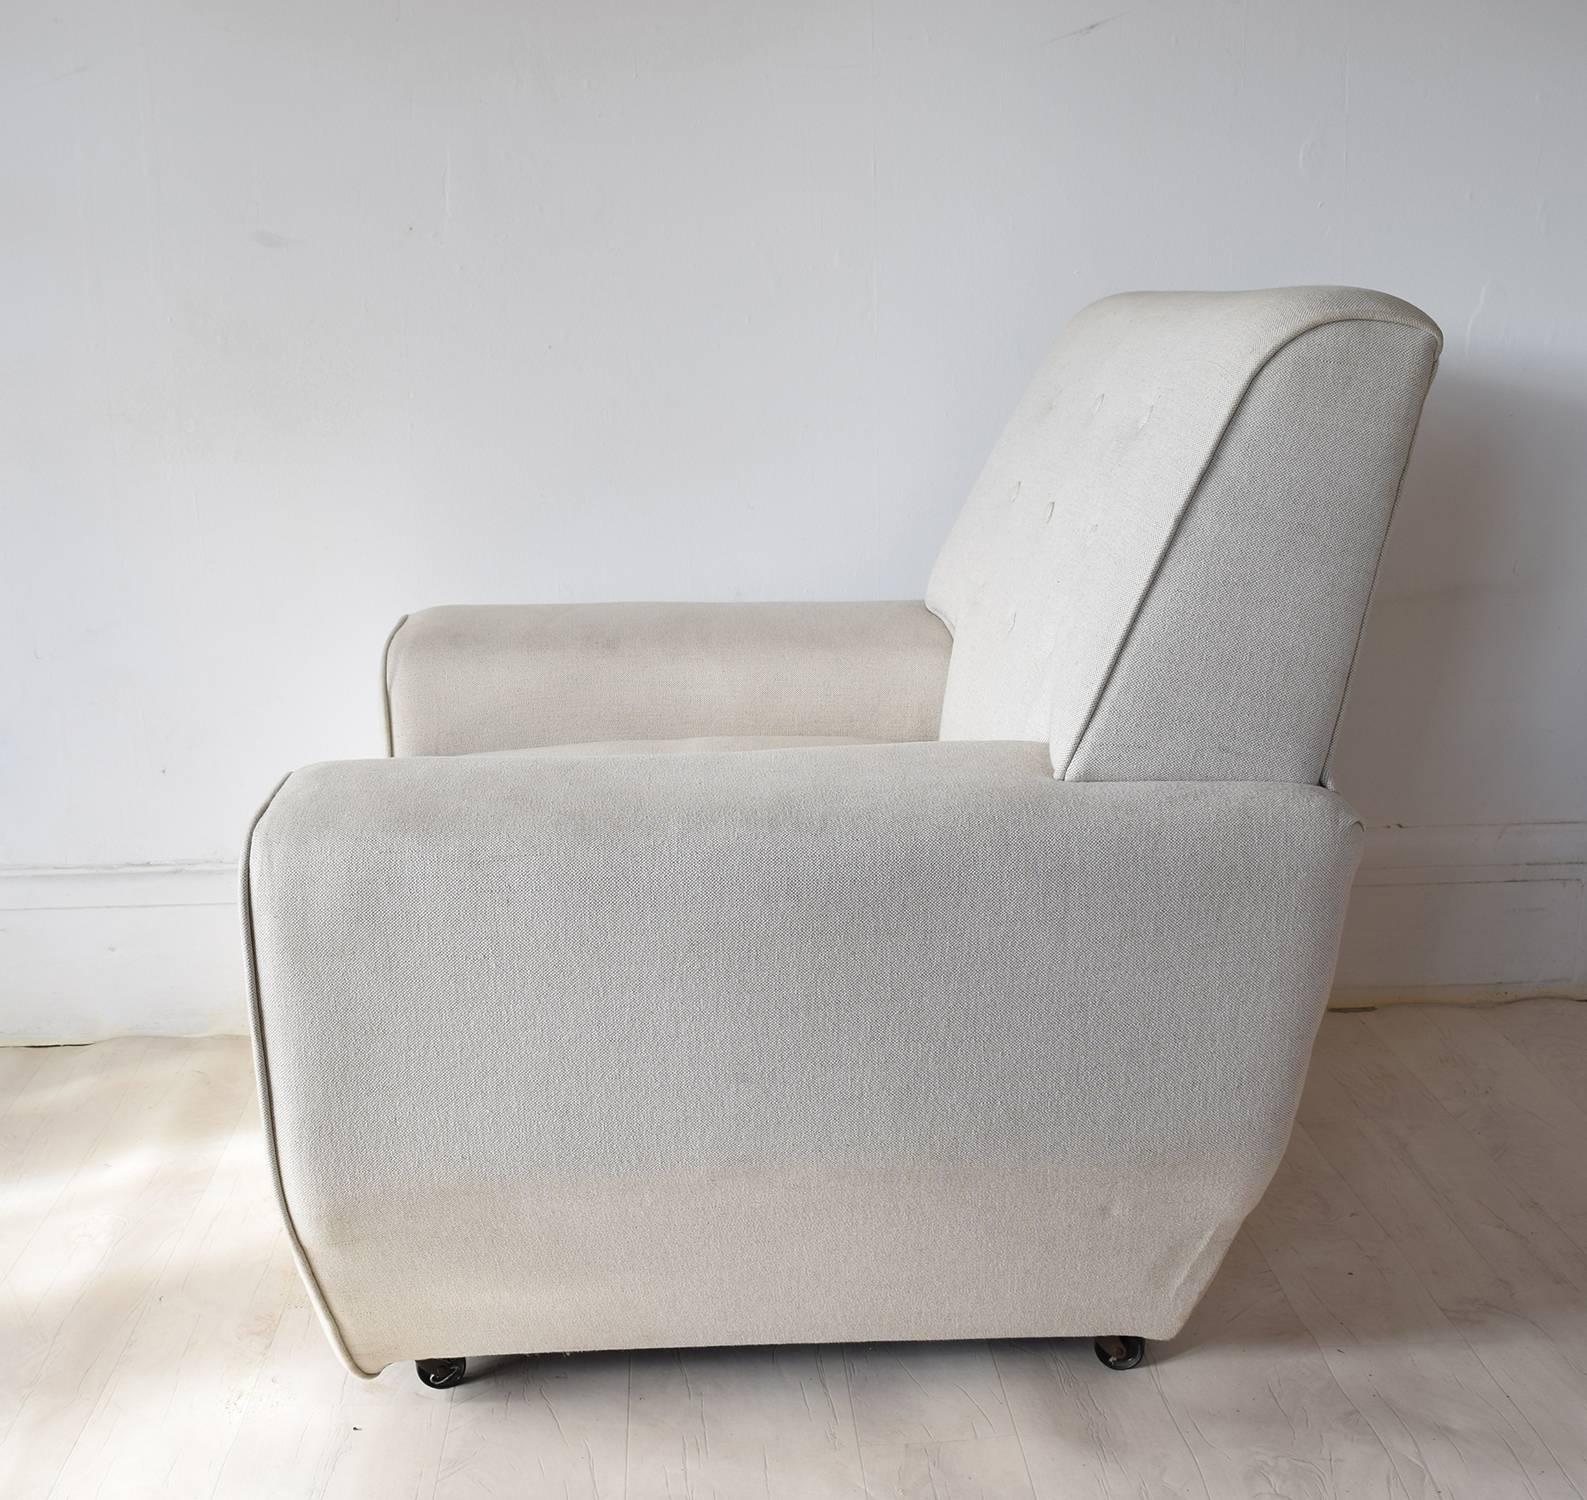 Very architectural shape.

Highly evocative of the 1960s.

They have been re-upholstered in a very smart cream colored linen

Designer unknown.
  